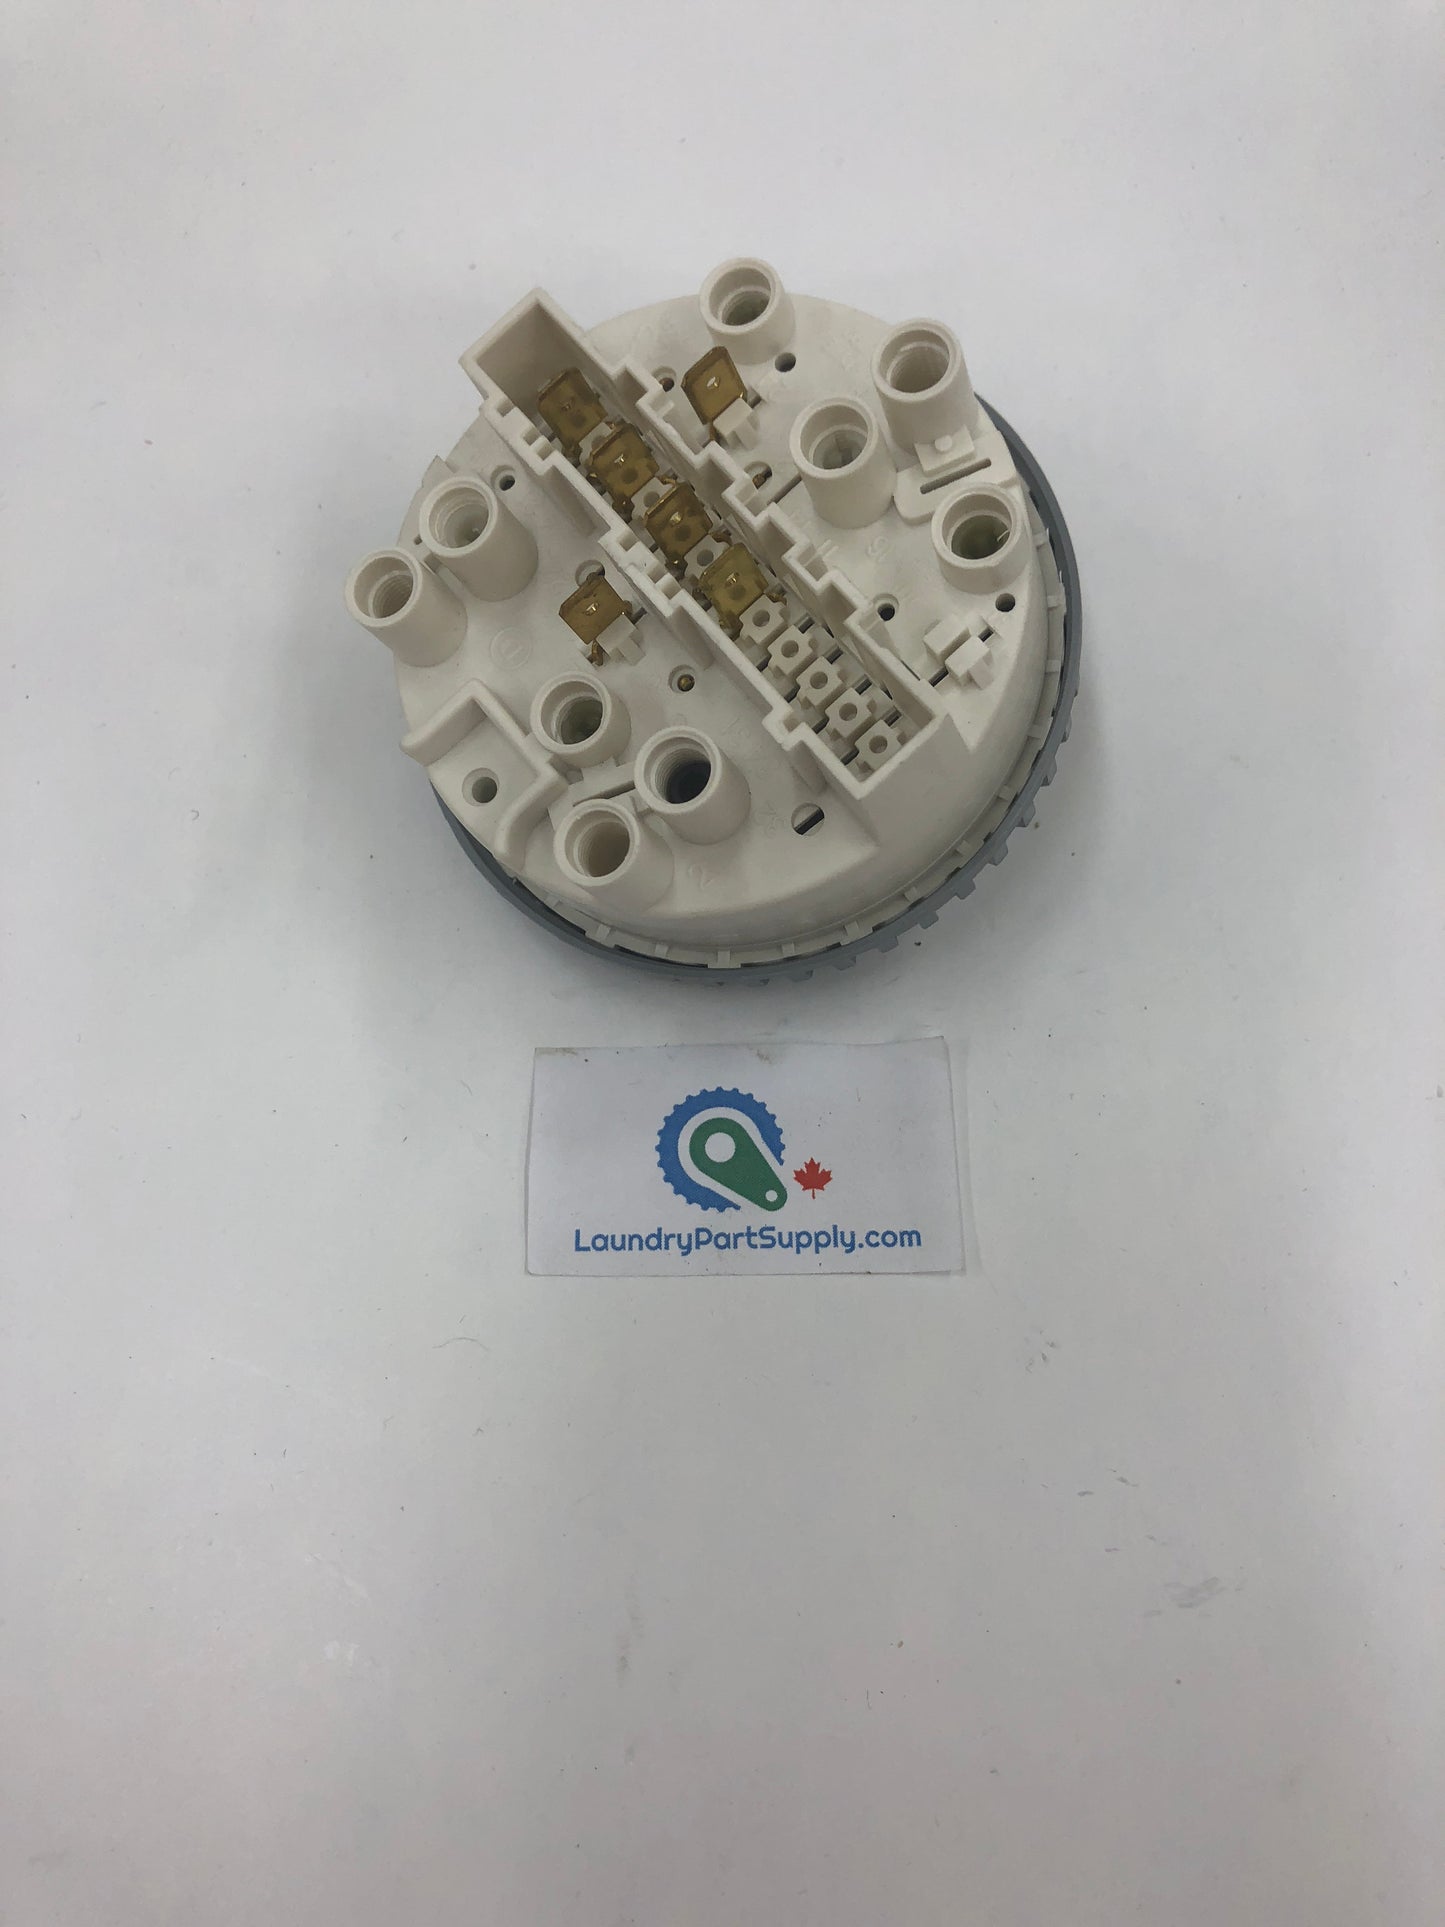 WATER LEVEL SWITCH CONTROL P3, P6 W/O HE